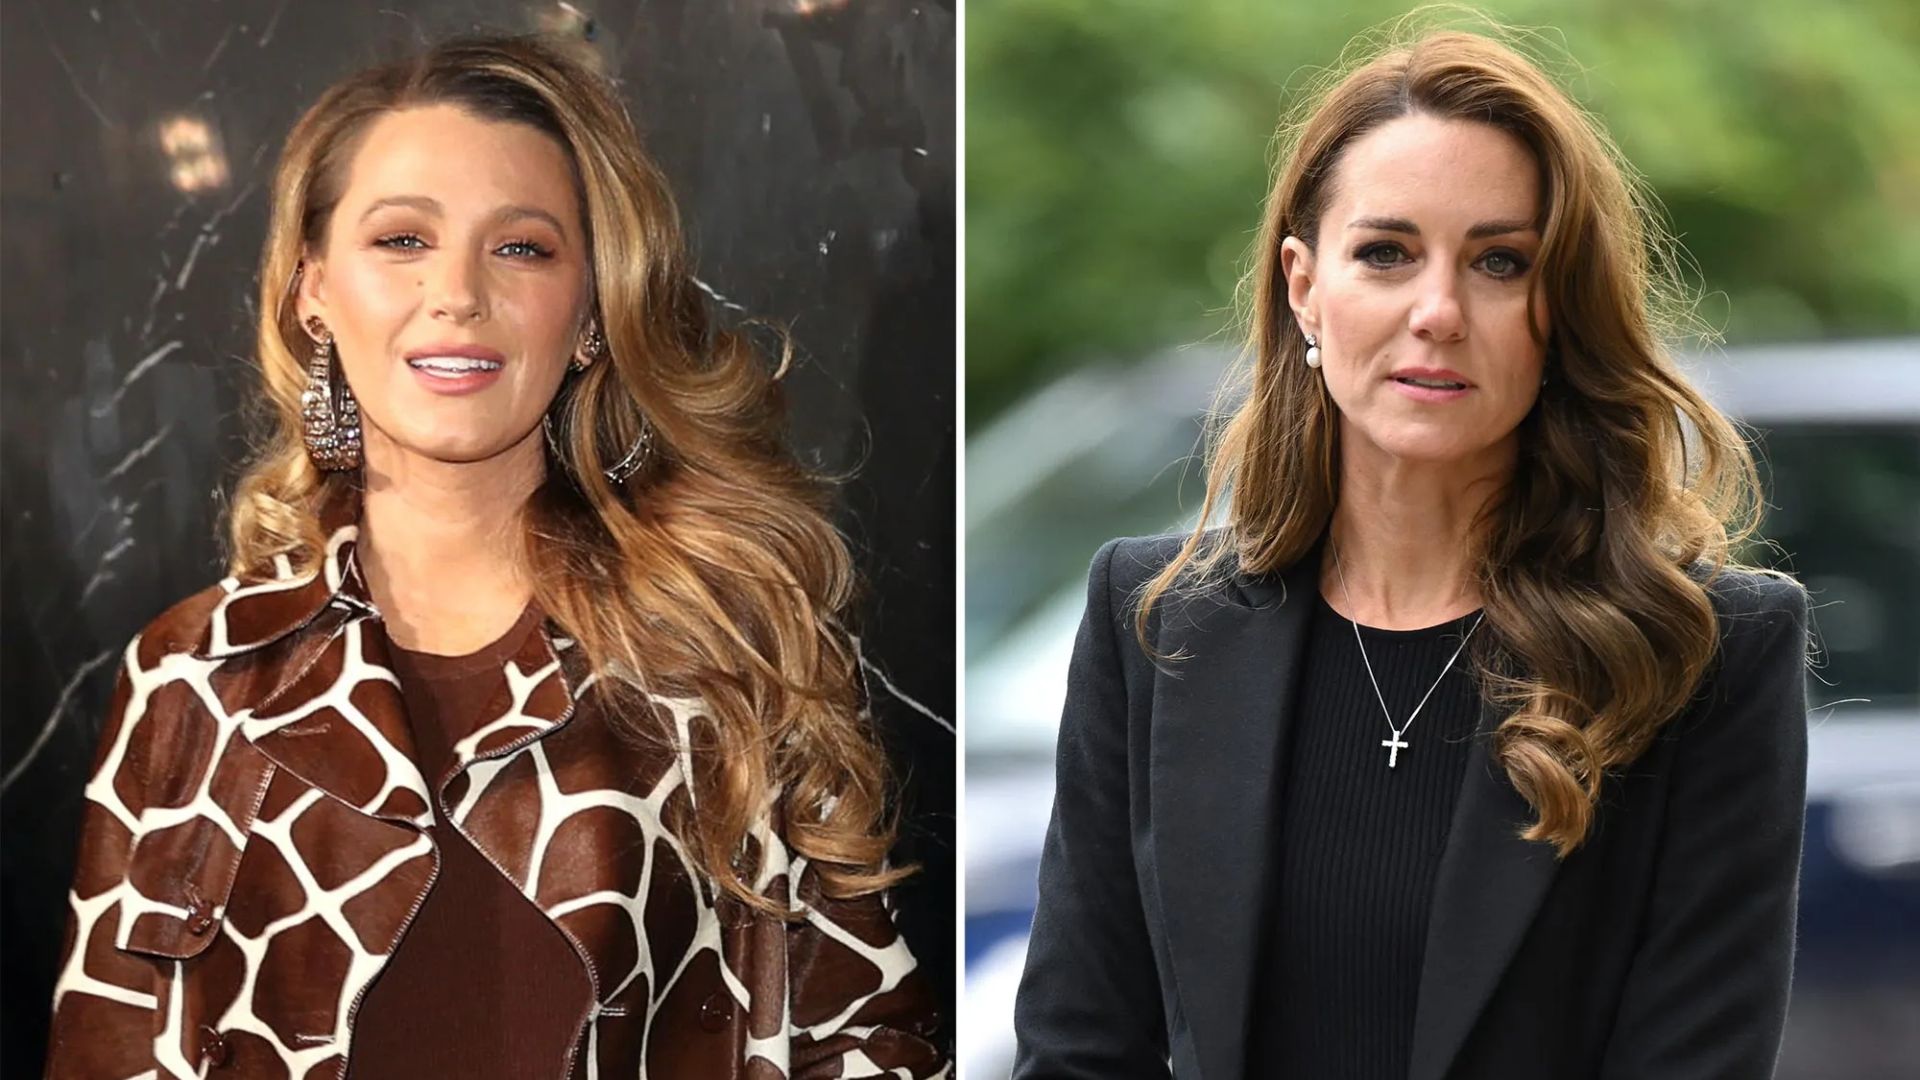 ‘Mortified’ Blake Lively Over Photoshop Fails Joke After Princess’s Cancer News